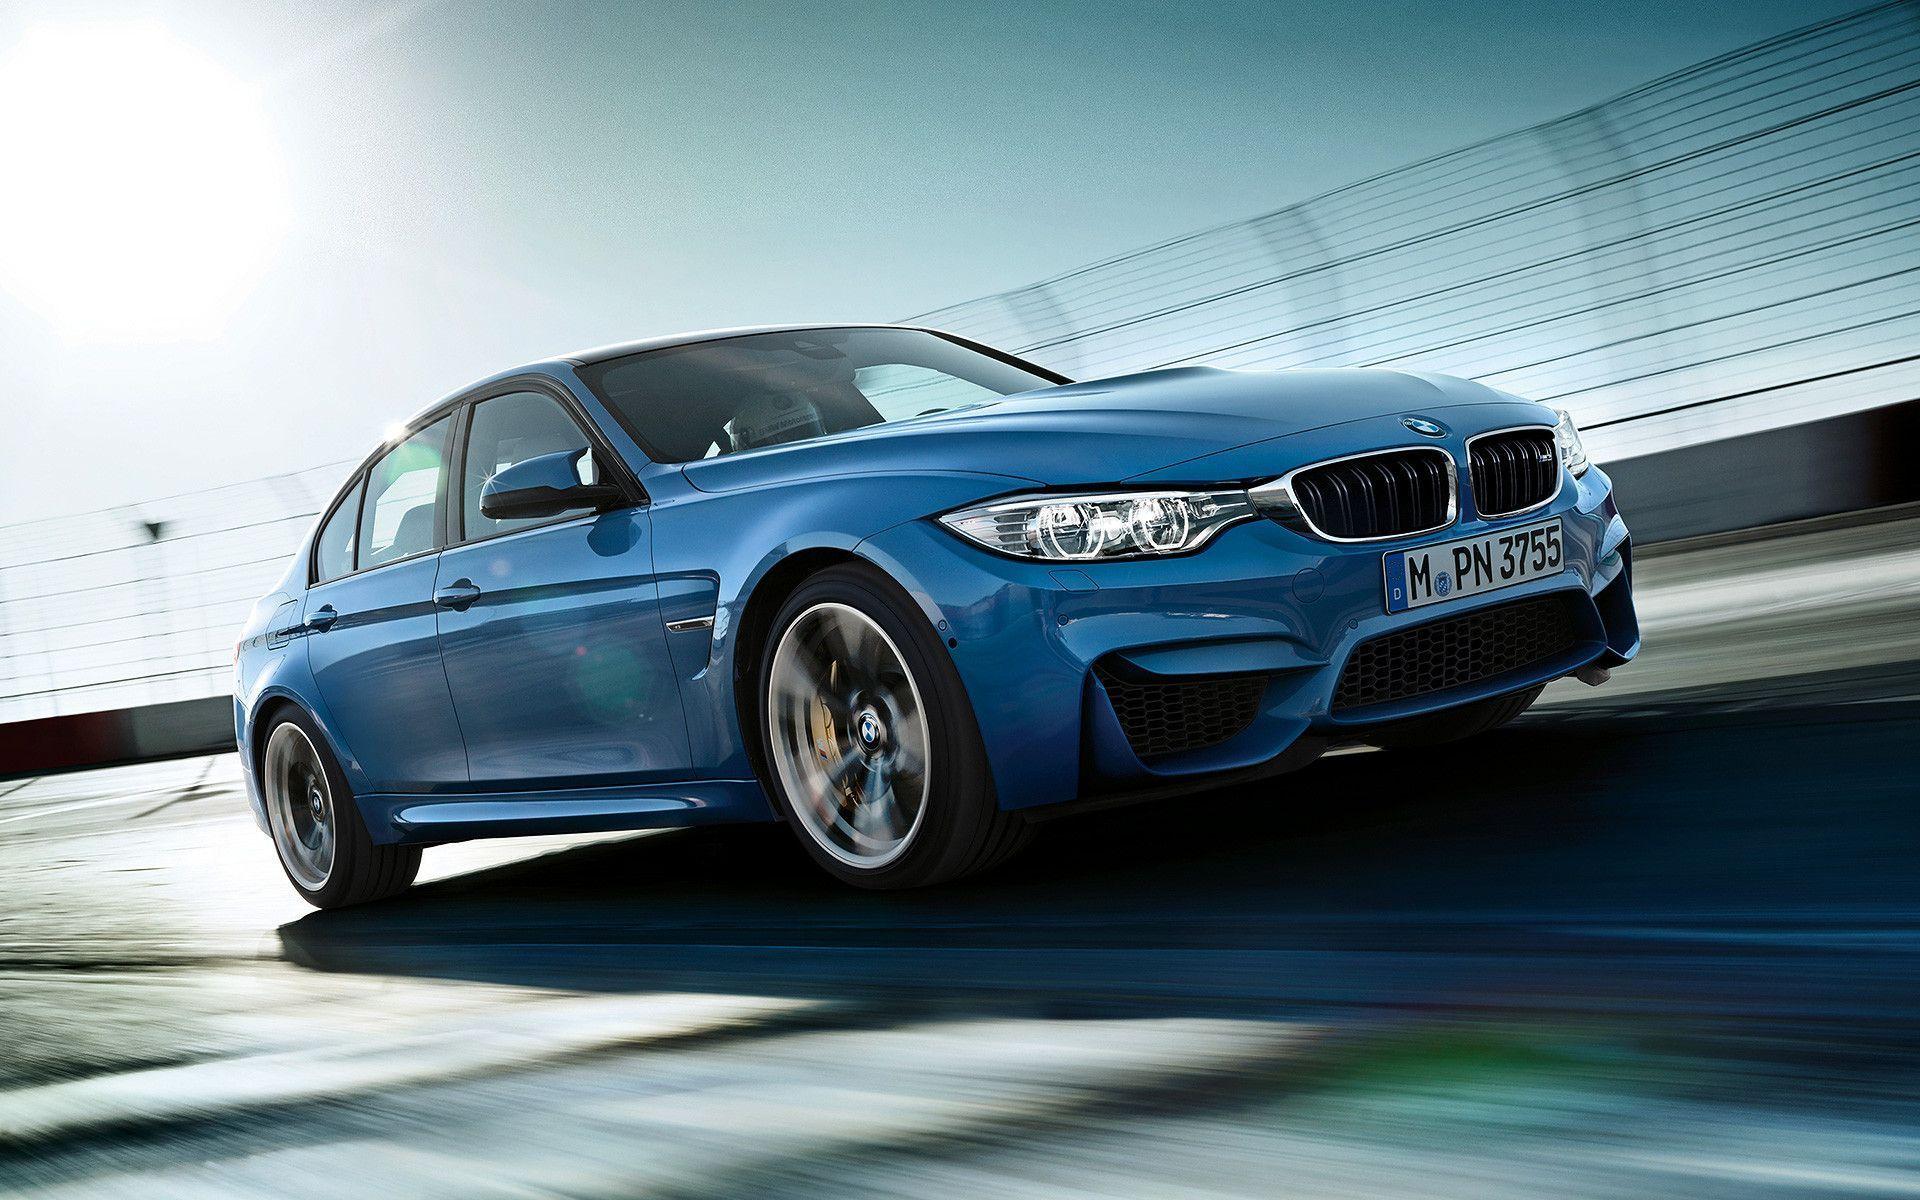 BMW M4 and BMW M3 Wallpaper NOW!